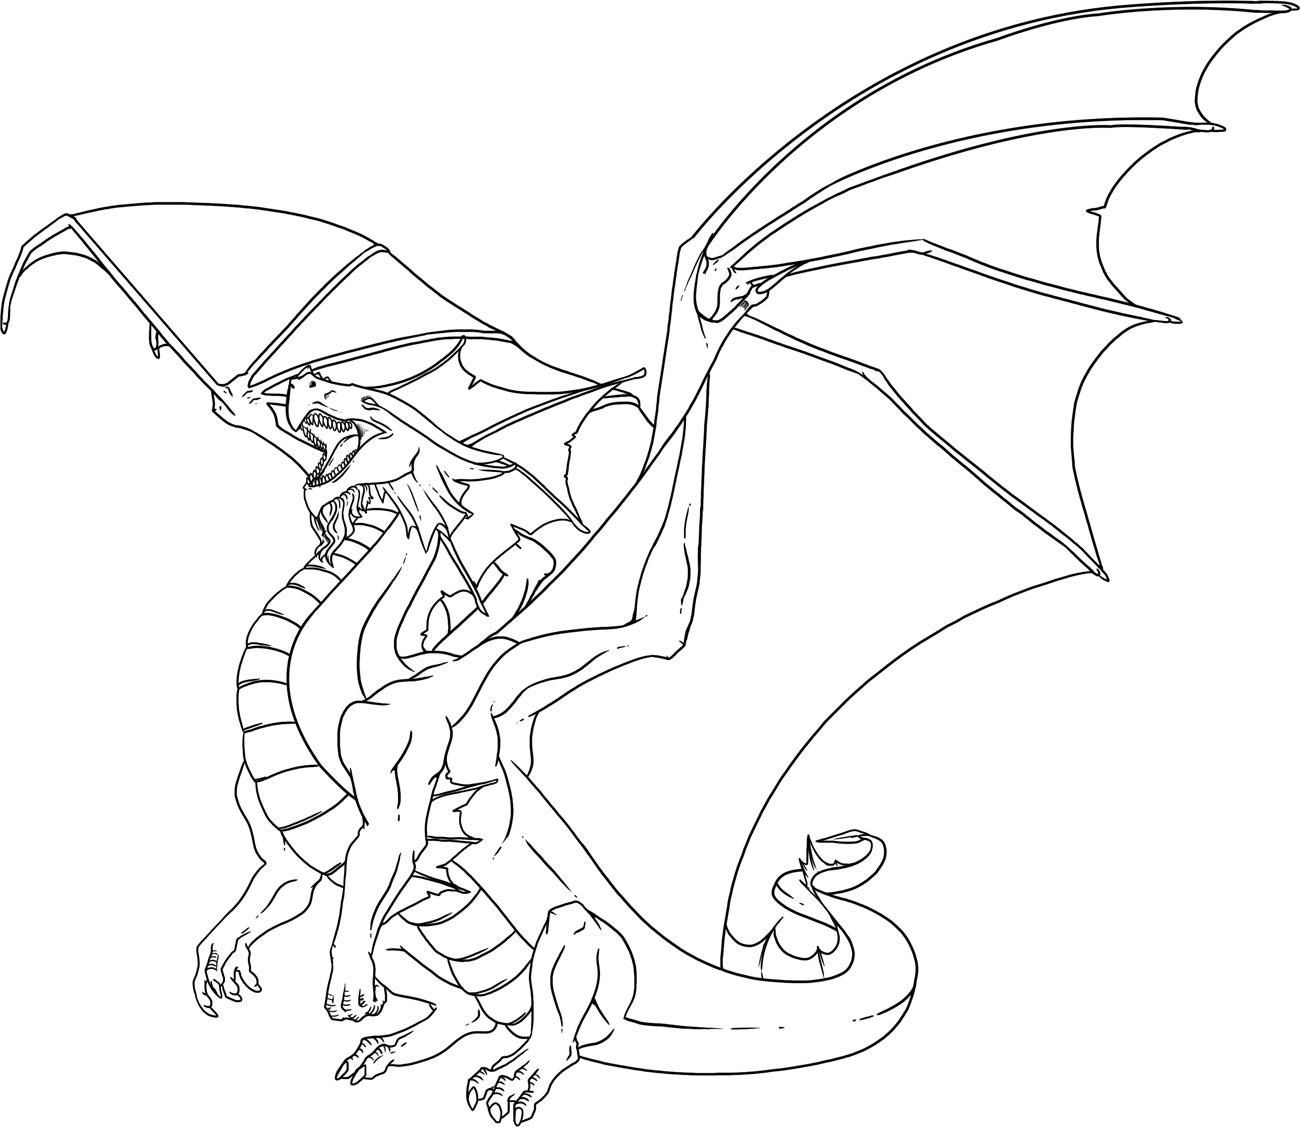 Download Dragon Coloring Pages for Adults - Best Coloring Pages For ...